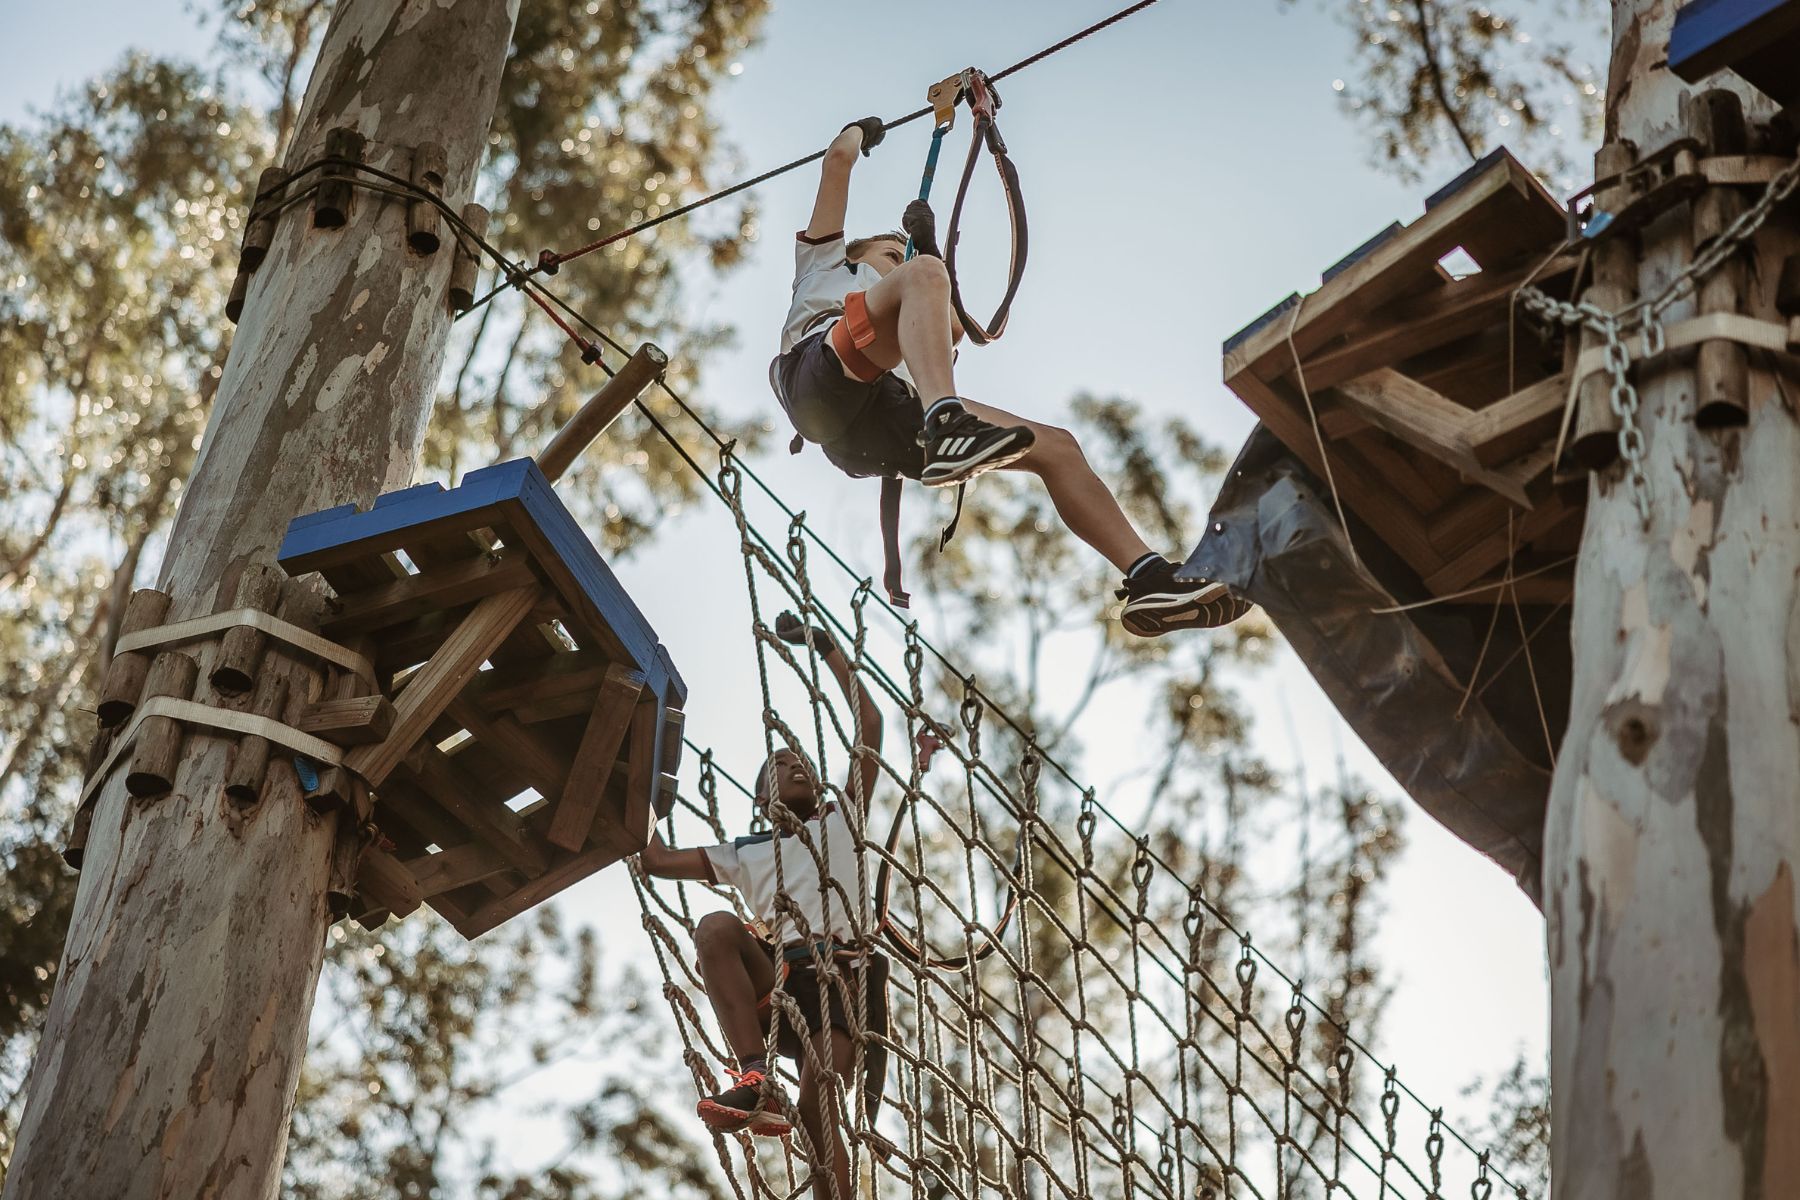 Go on a Treetop Adventure at Acrobranch Modderfontein Park